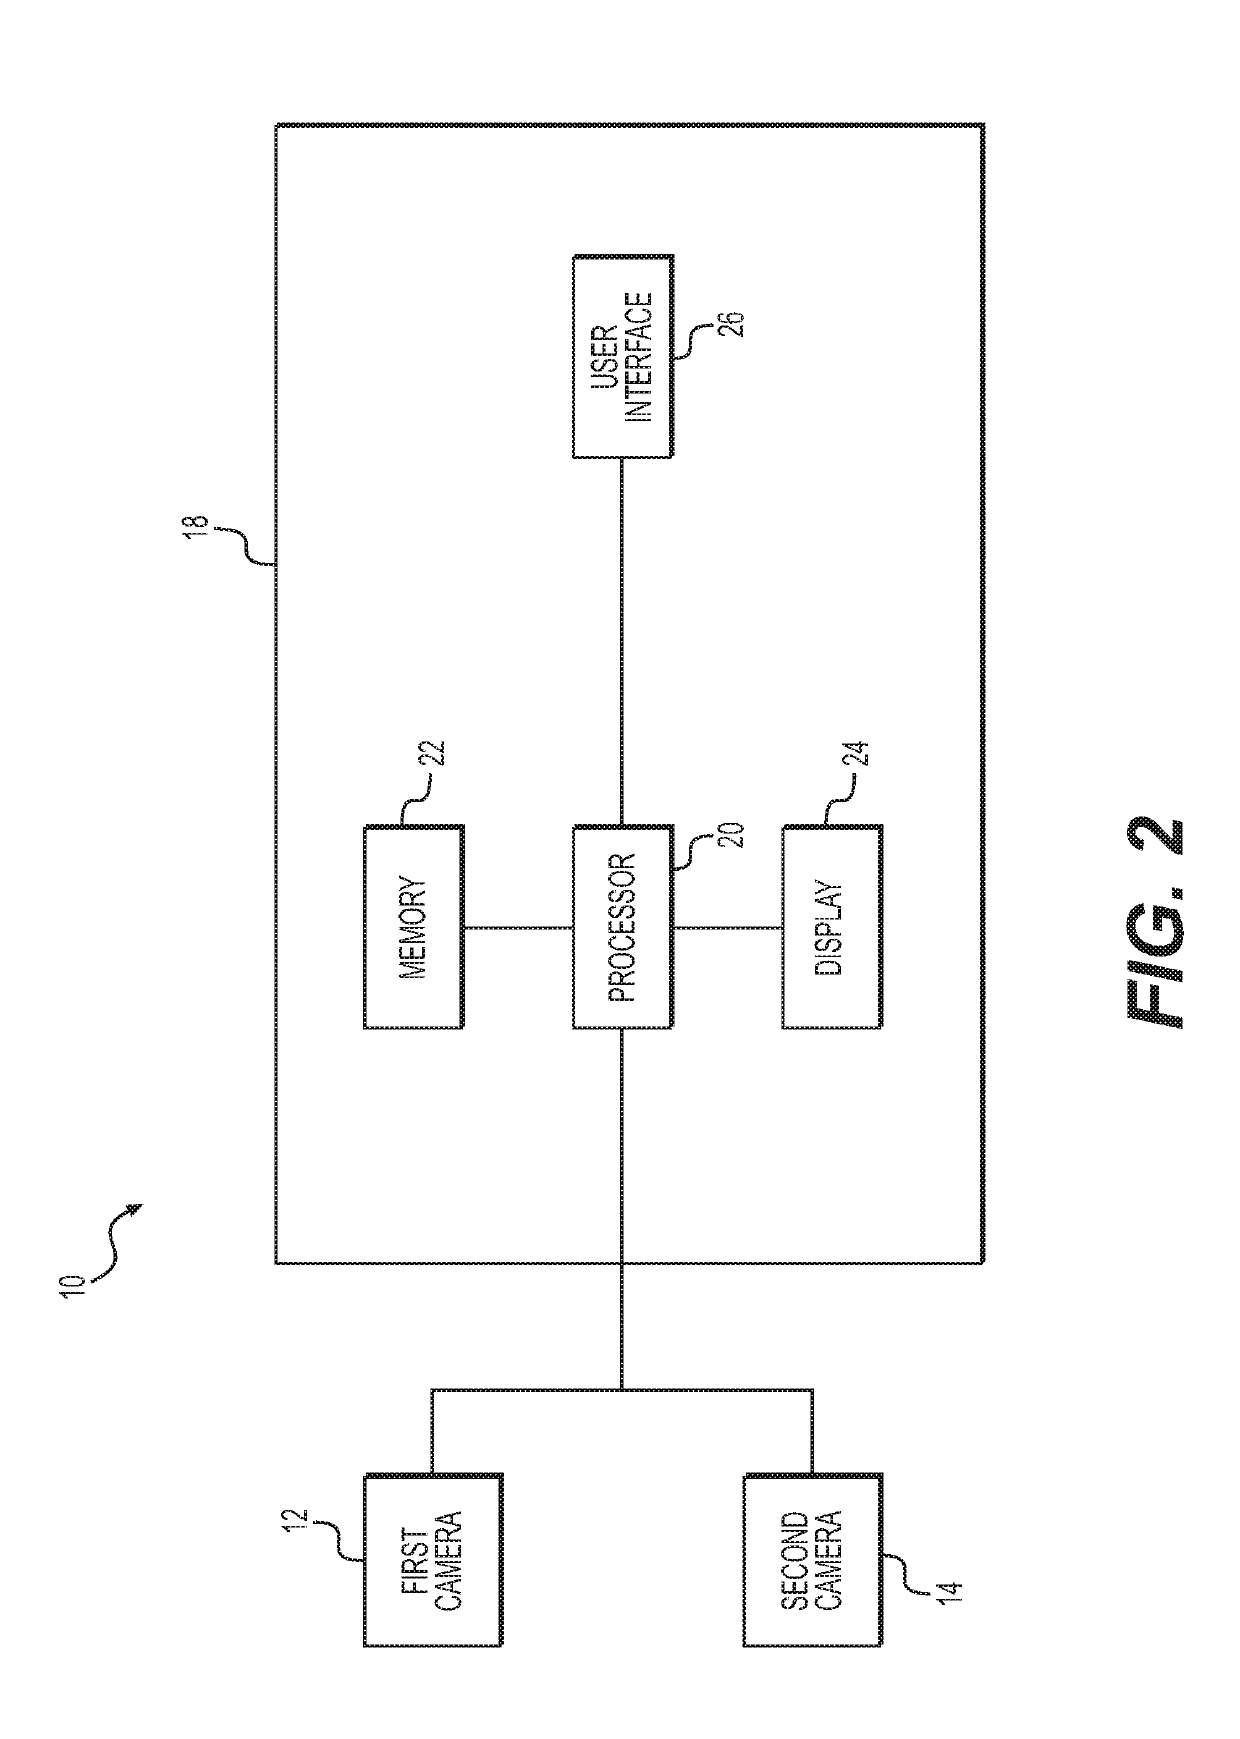 Method of performing dendrometry and forest mapping